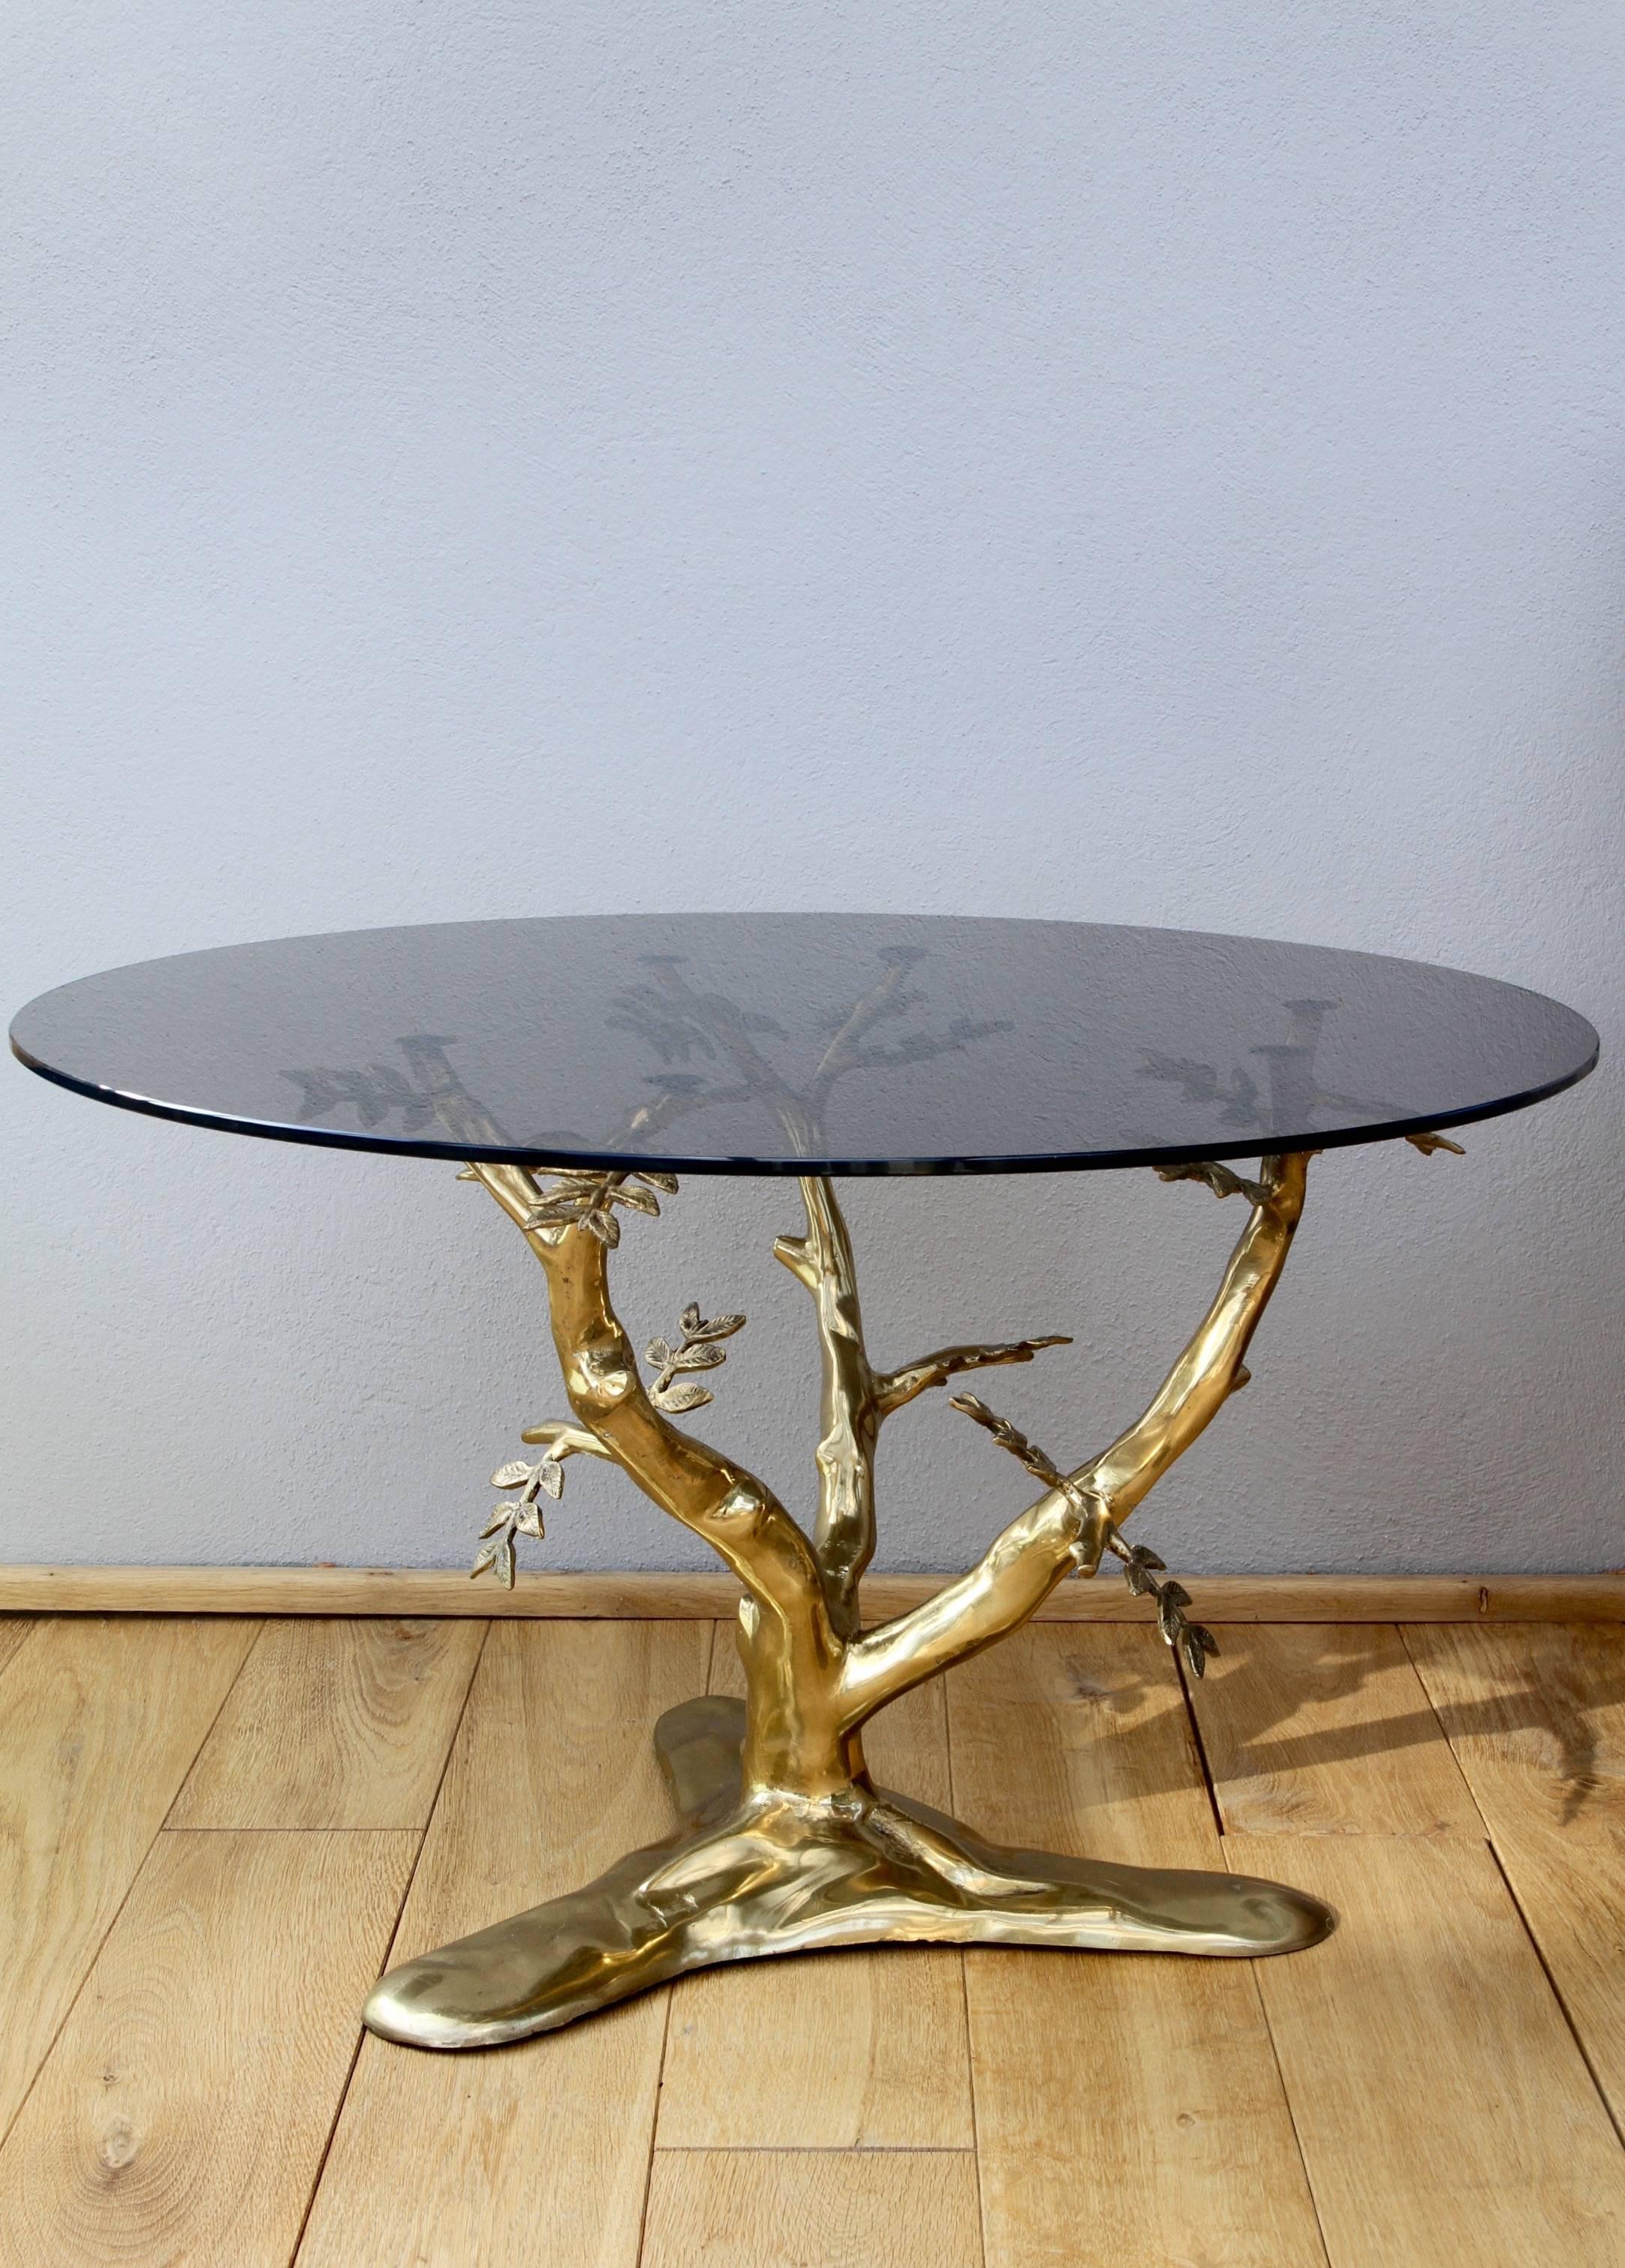 A beautifully designed and handcrafted table in the manner of Willy Daro, circa 1975. Cast in brass, the branches of the 'Bonsai' tree support the round smoked glass tabletop and bring a whimsical touch of nature in to any room whether a midcentury